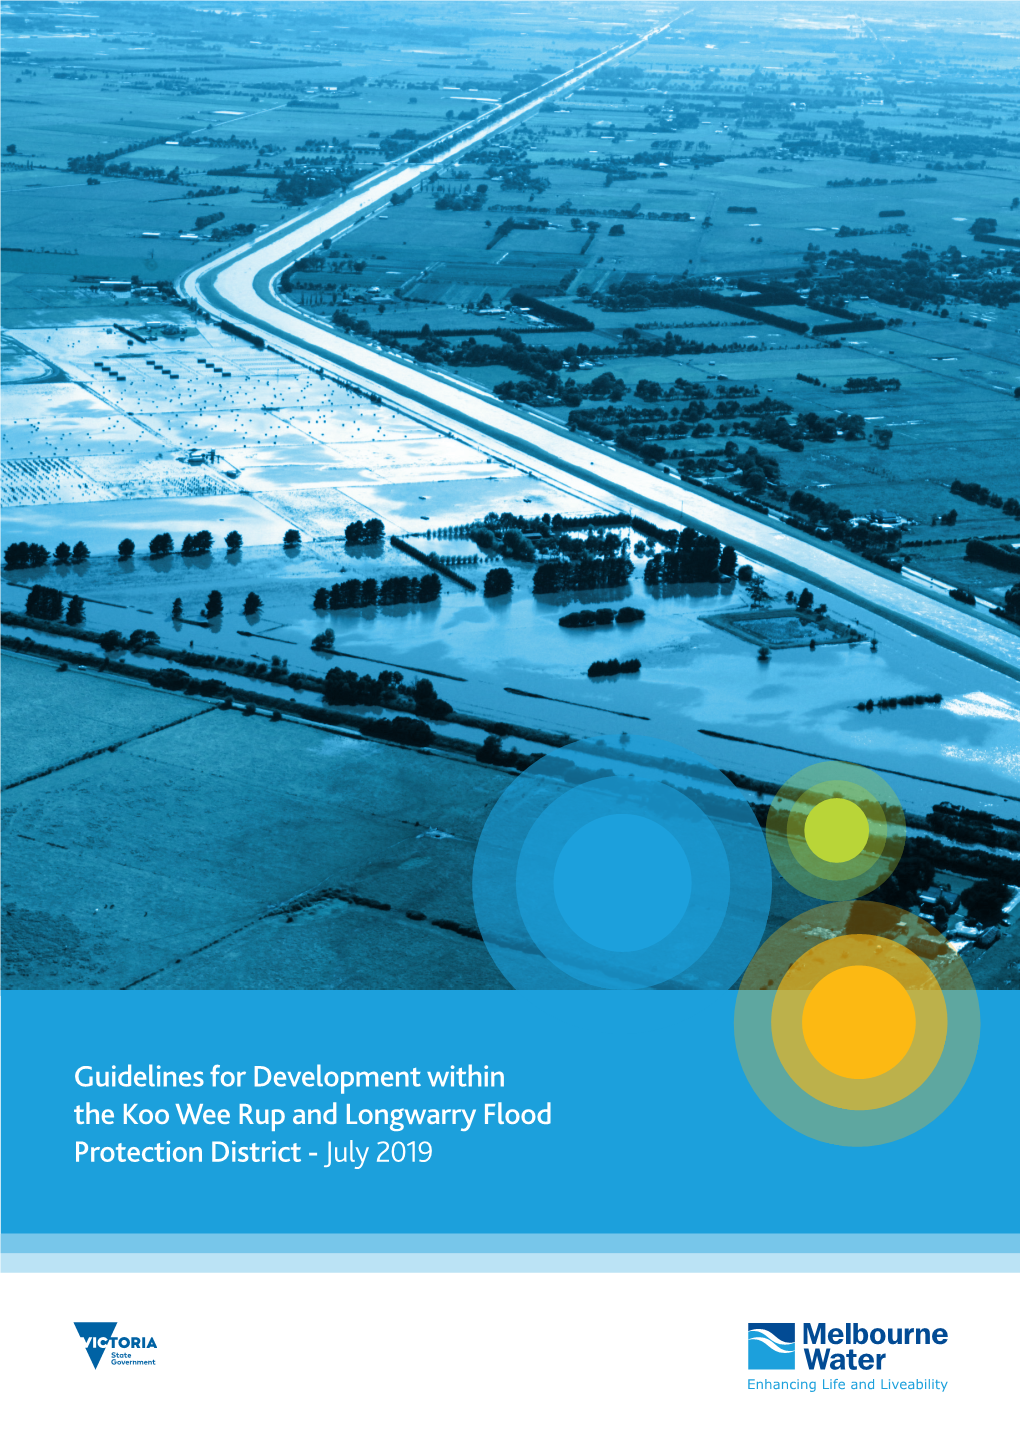 Guidelines for Development Within the Koo Wee Rup and Longwarry Flood Protection District - July 2019